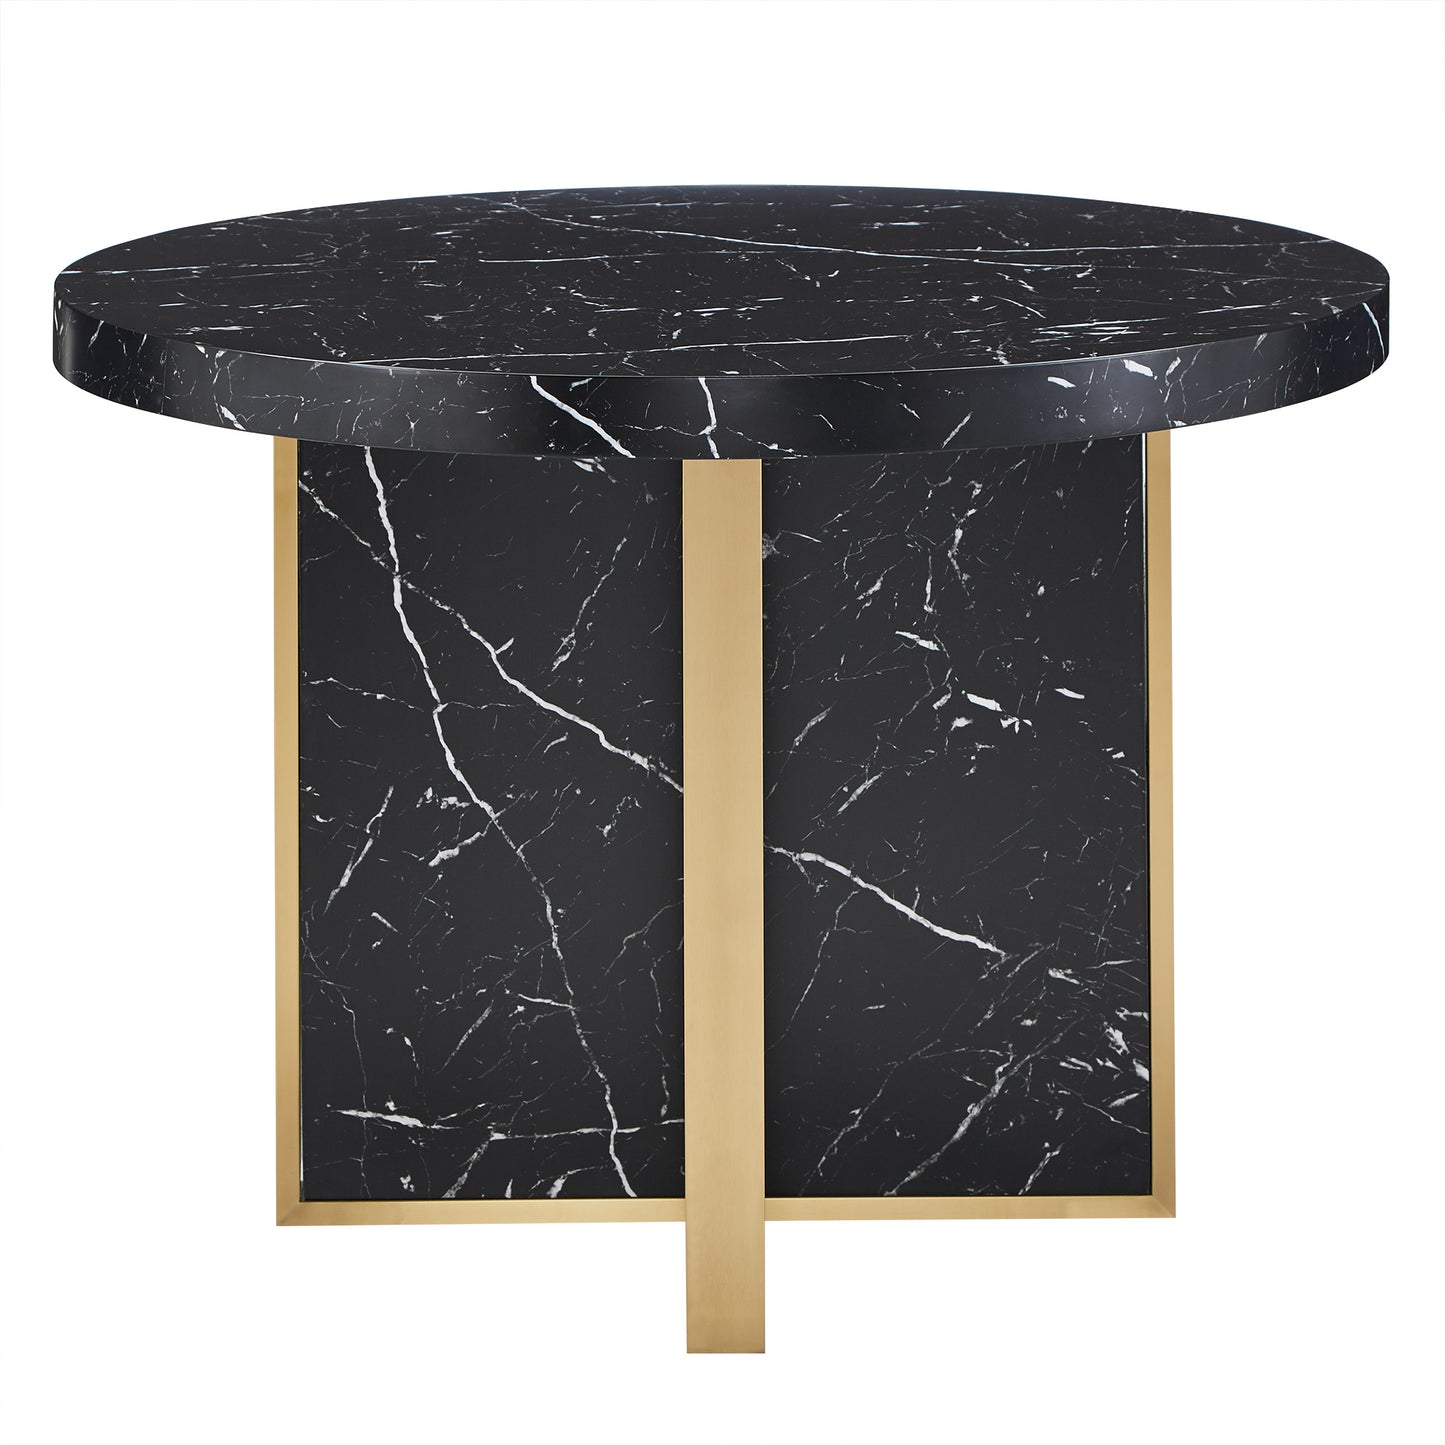 43" Wide Faux Marble Round Dining Table - Black